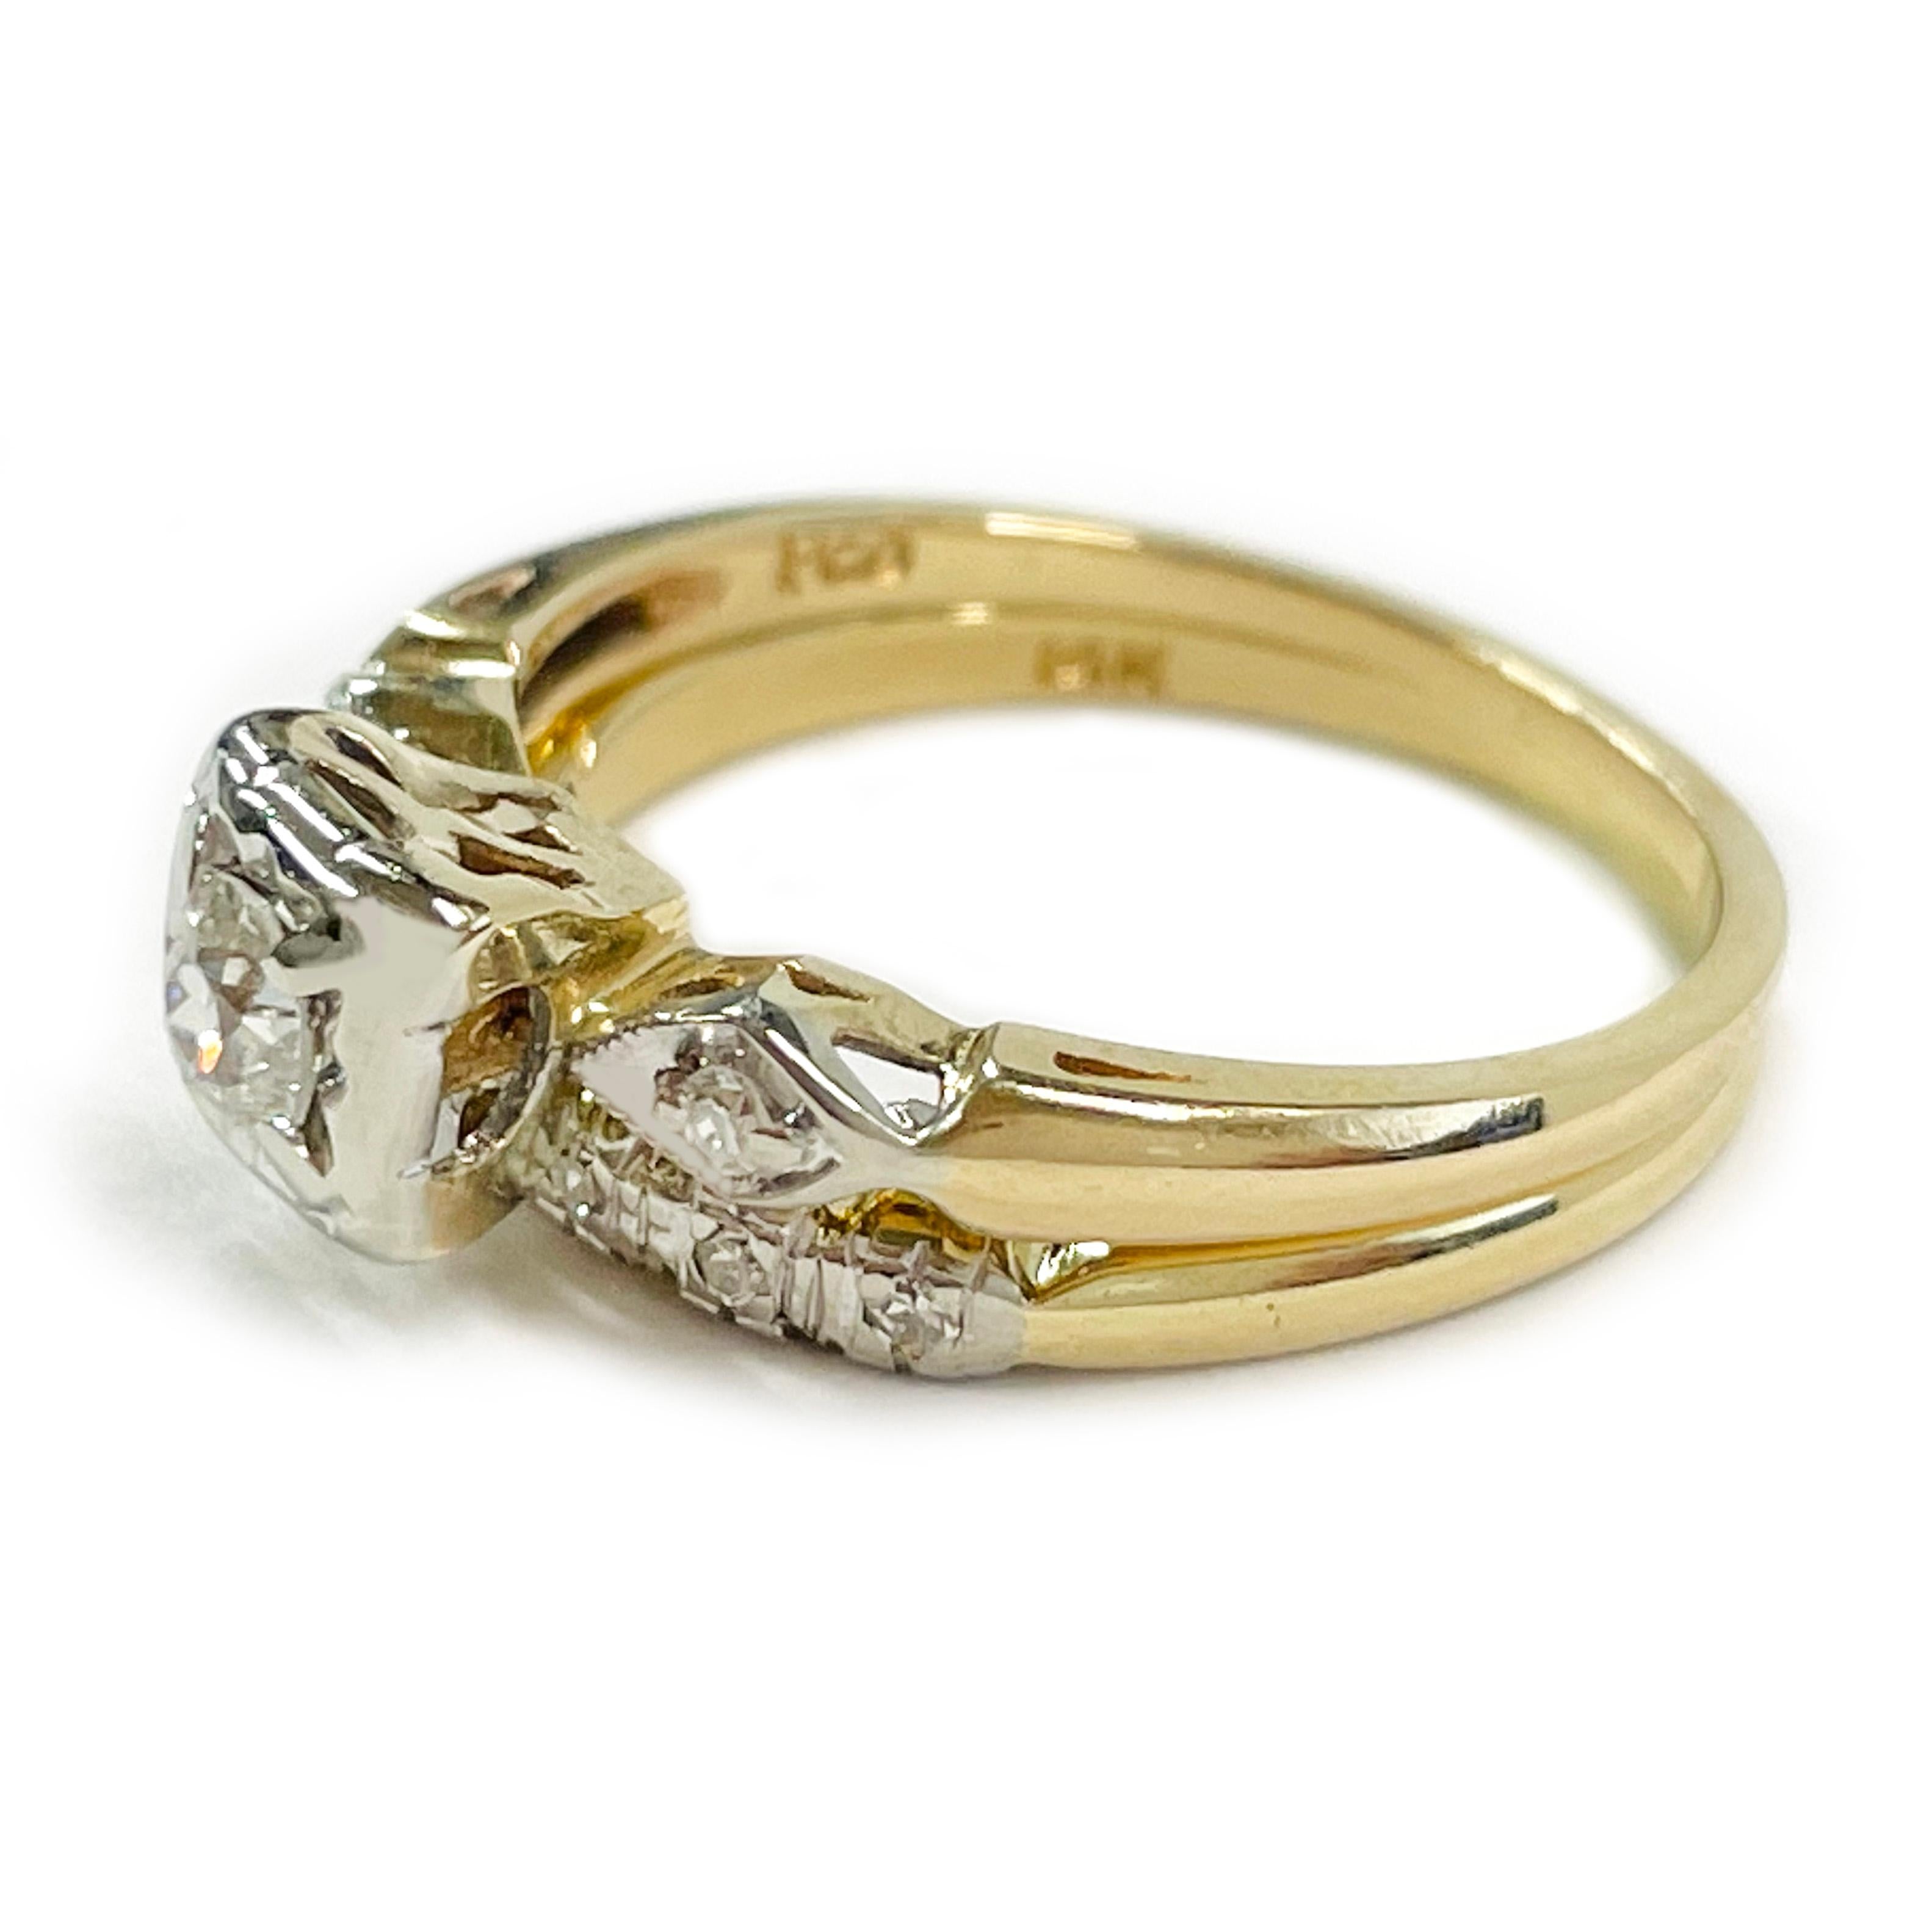 14 Karat White and Yellow Gold Diamond Wedding Ring Set. The diamond ring is simple and elegant with an illusion-set diamond 4-prong set with two side diamonds, one 1.2mm round diamond on each side. The center single-cut diamond is SI2 (G.I.A.) in